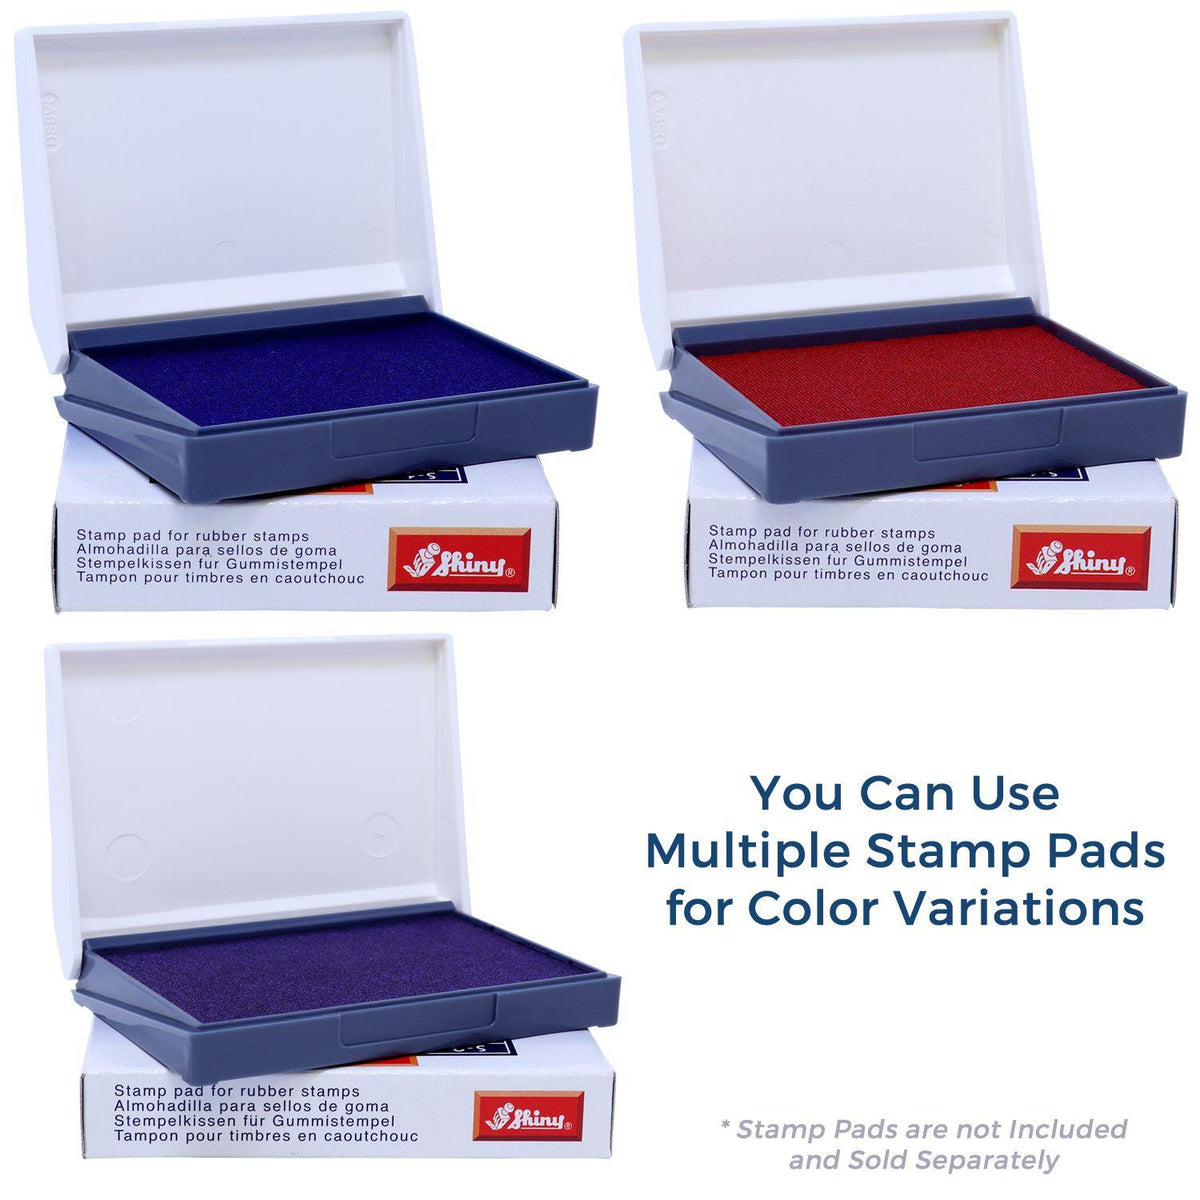 Stamp Pads for Large Paid Rubber Stamp Available